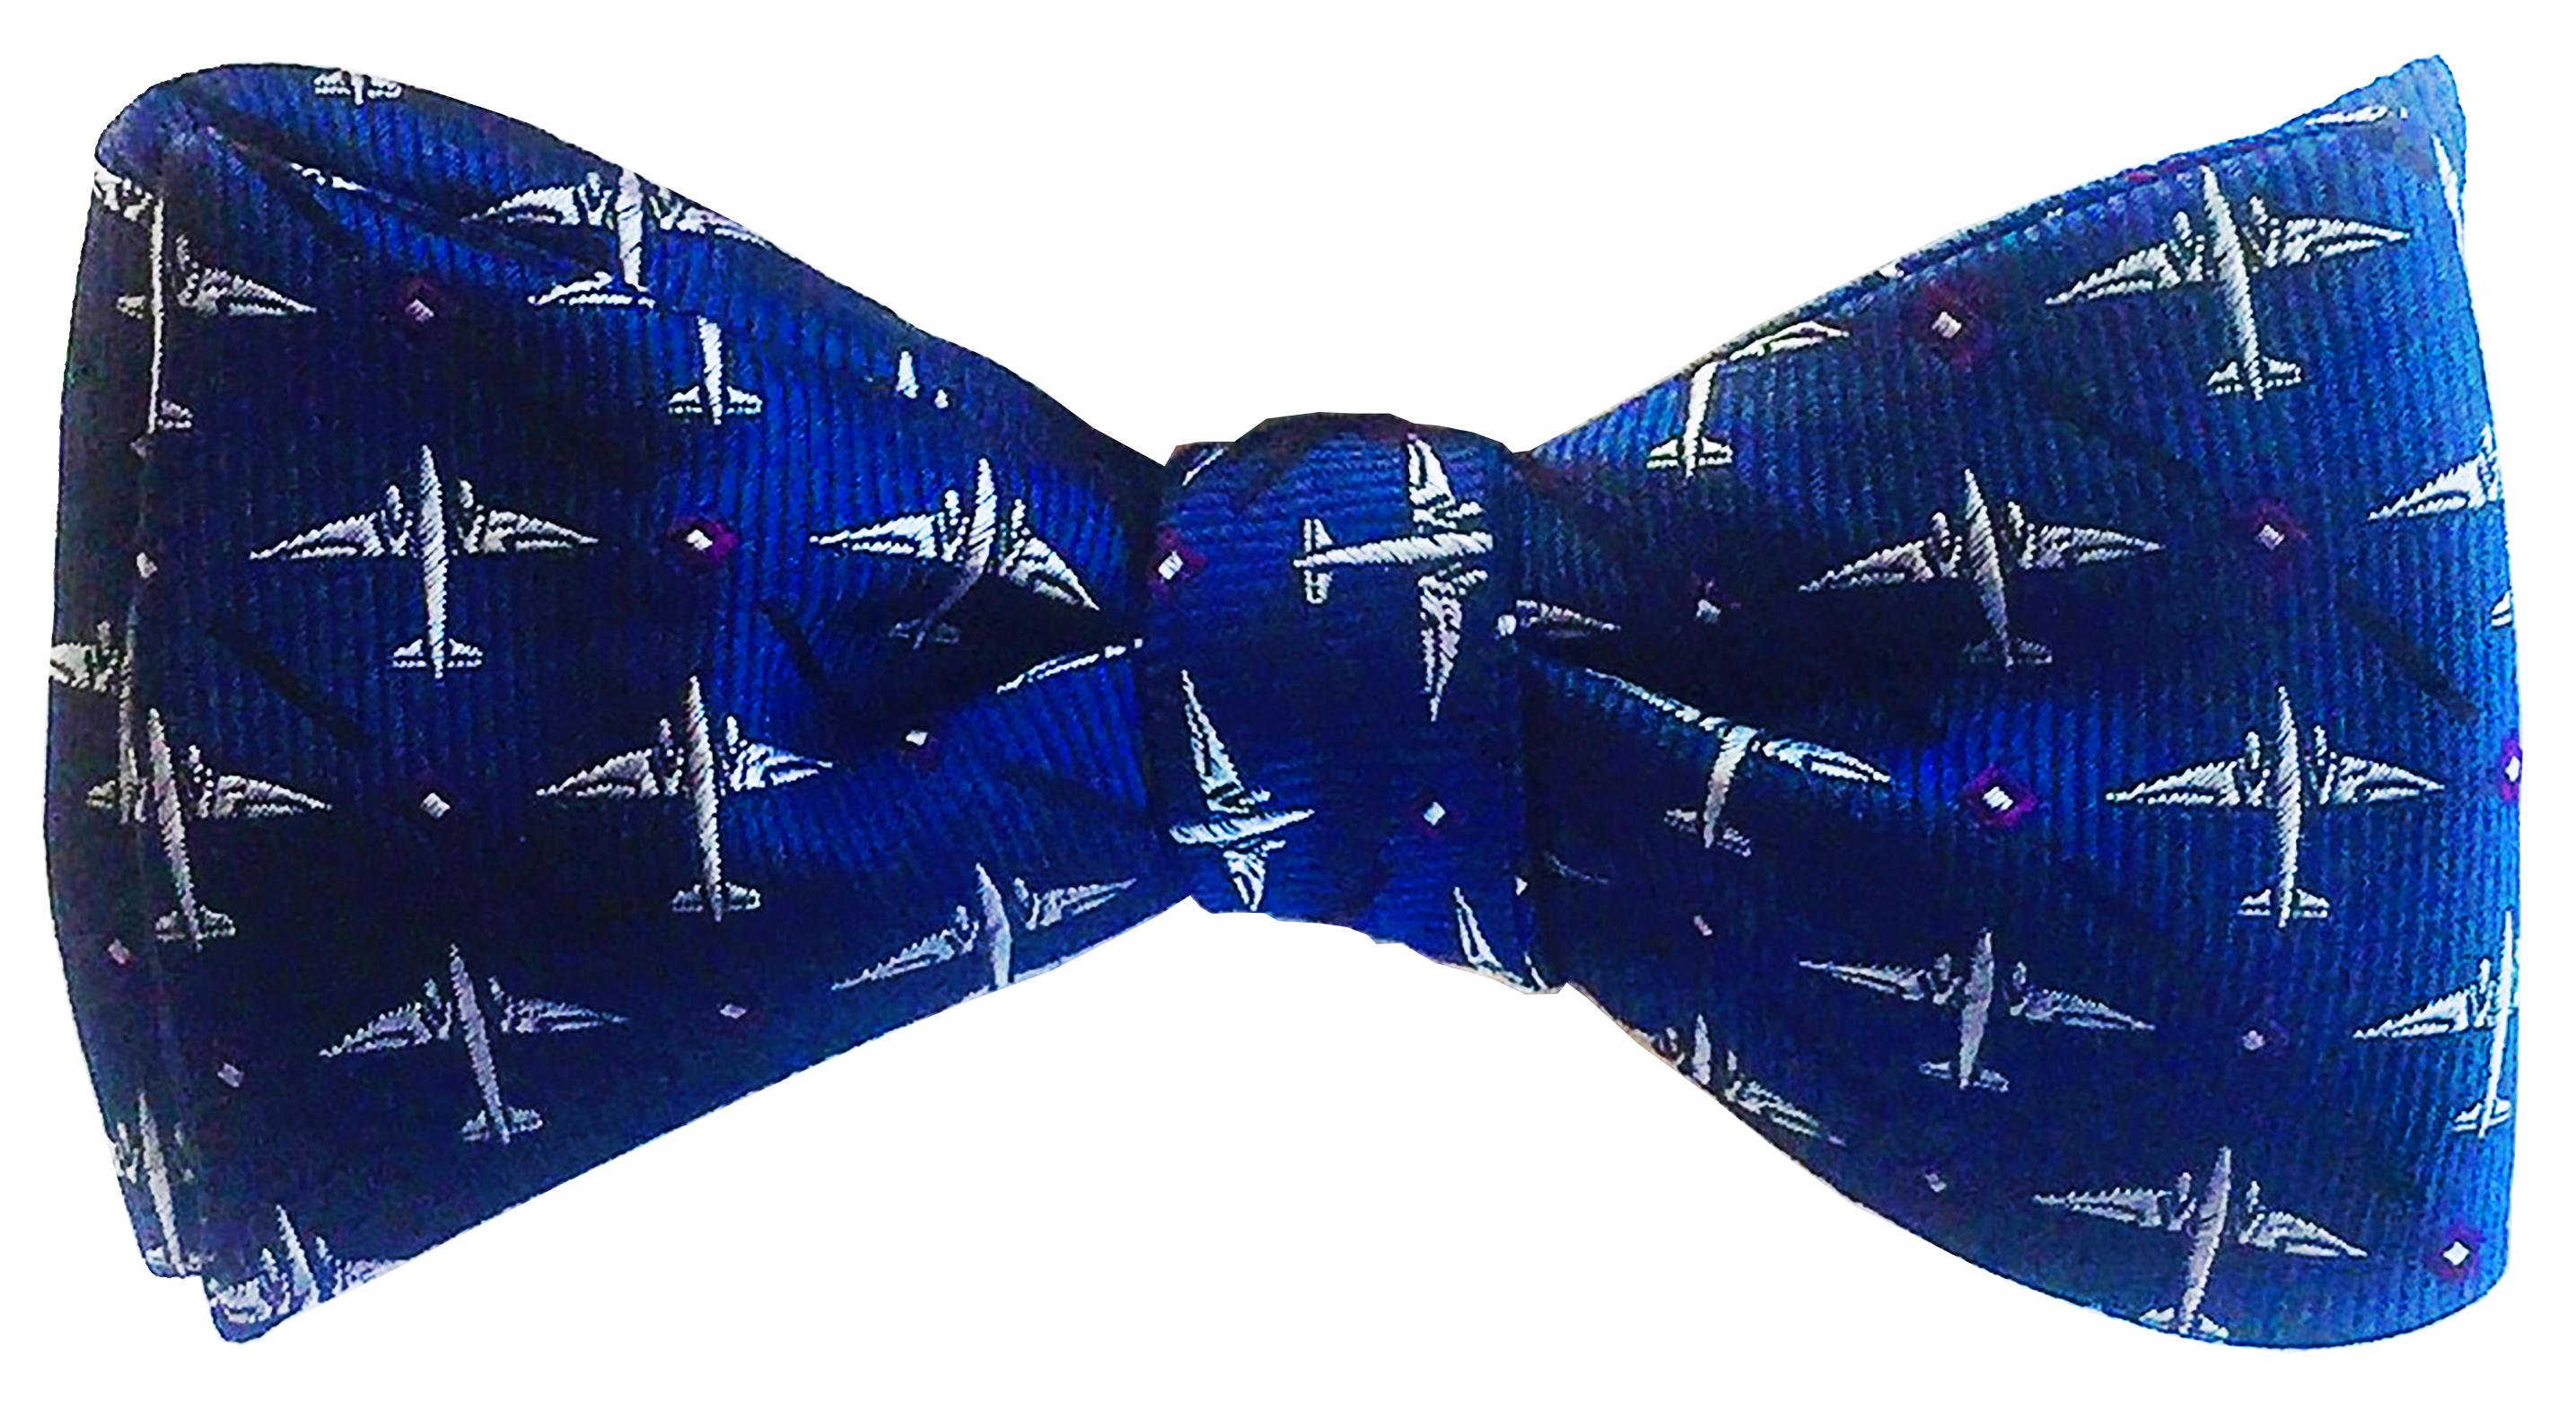 DC-3 (C-47) bow tie in deep blue